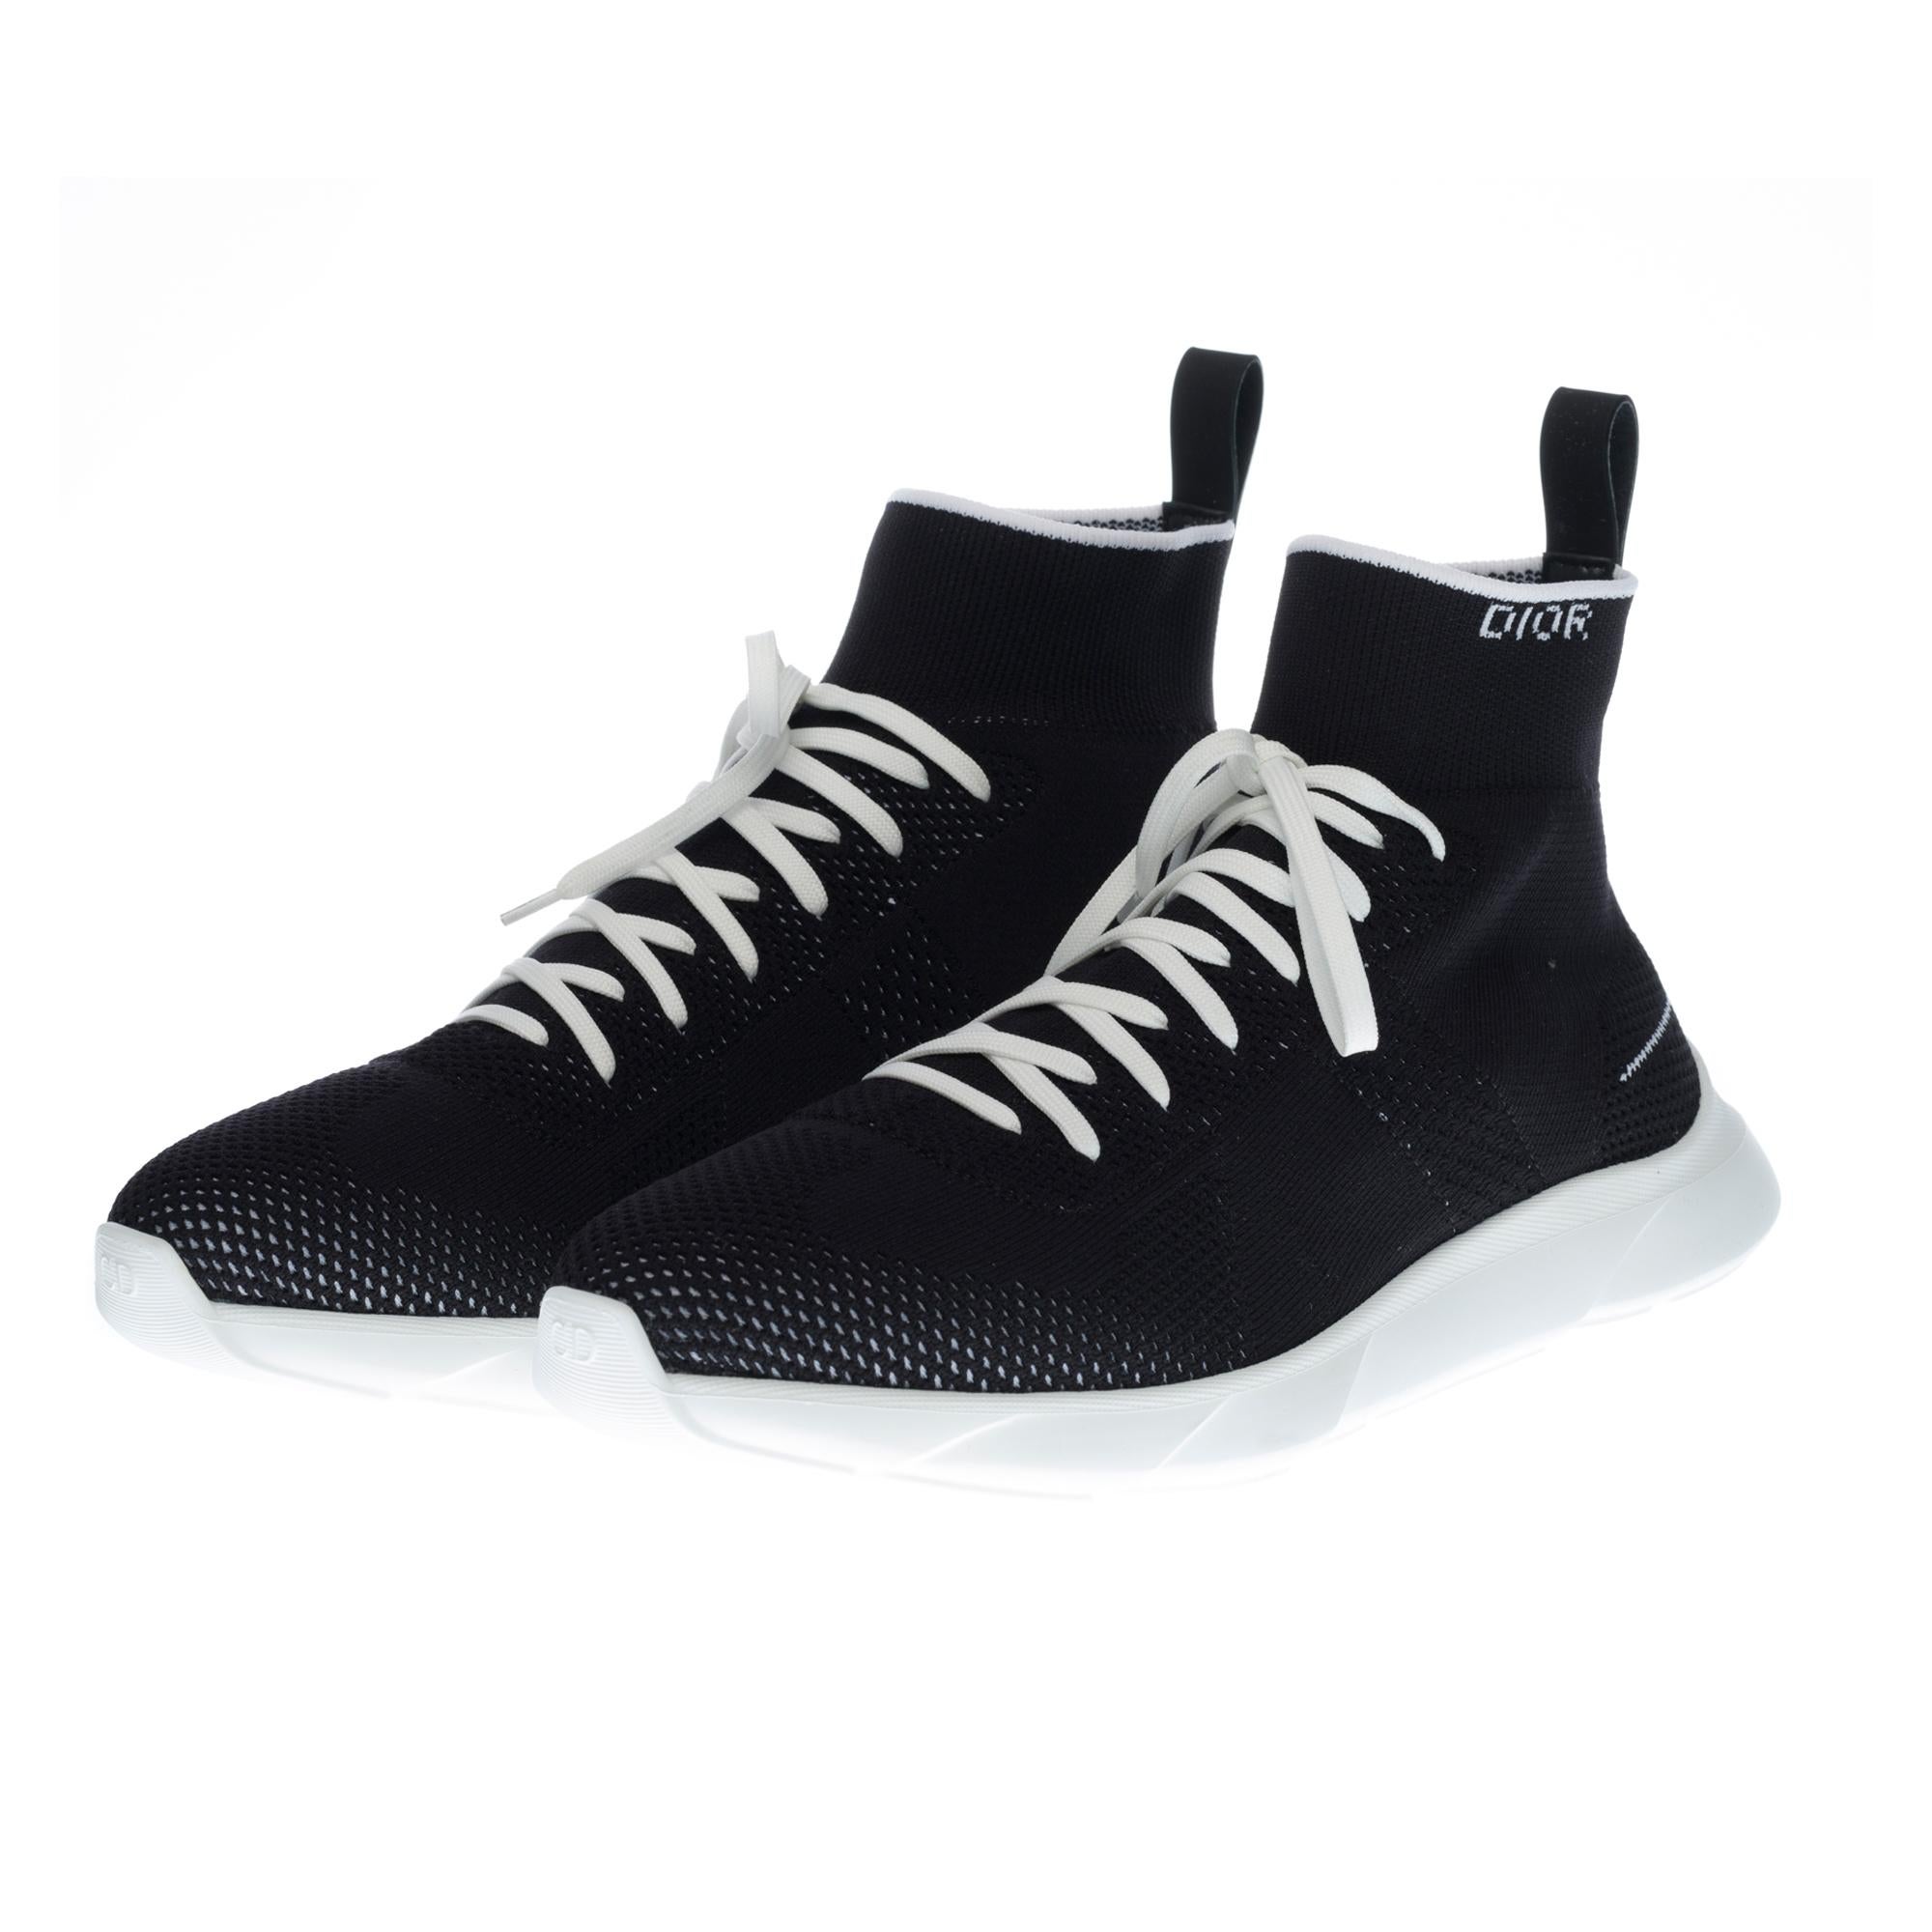 Christian Dior B21 high-rise sneakers, black canvas, white rubber sole

Size: 42
Signature: “CD, Made in Italy”

Reference: 13604211260

Brand new, never worn
Sold with box, dustbag and a set of additional laces